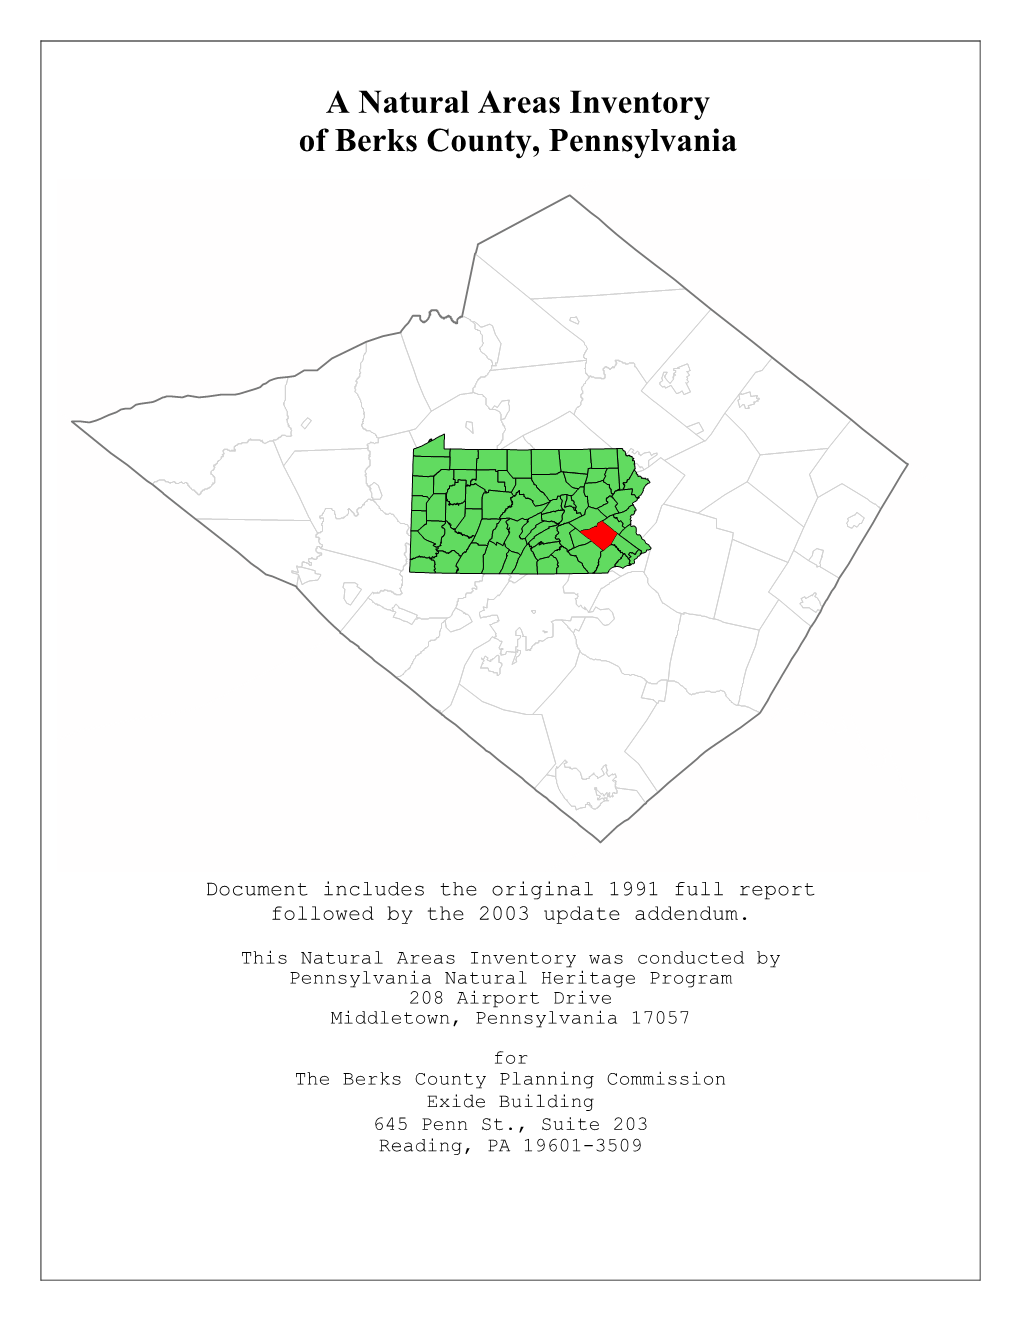 A Natural Areas Inventory of Berks County, Pennsylvania